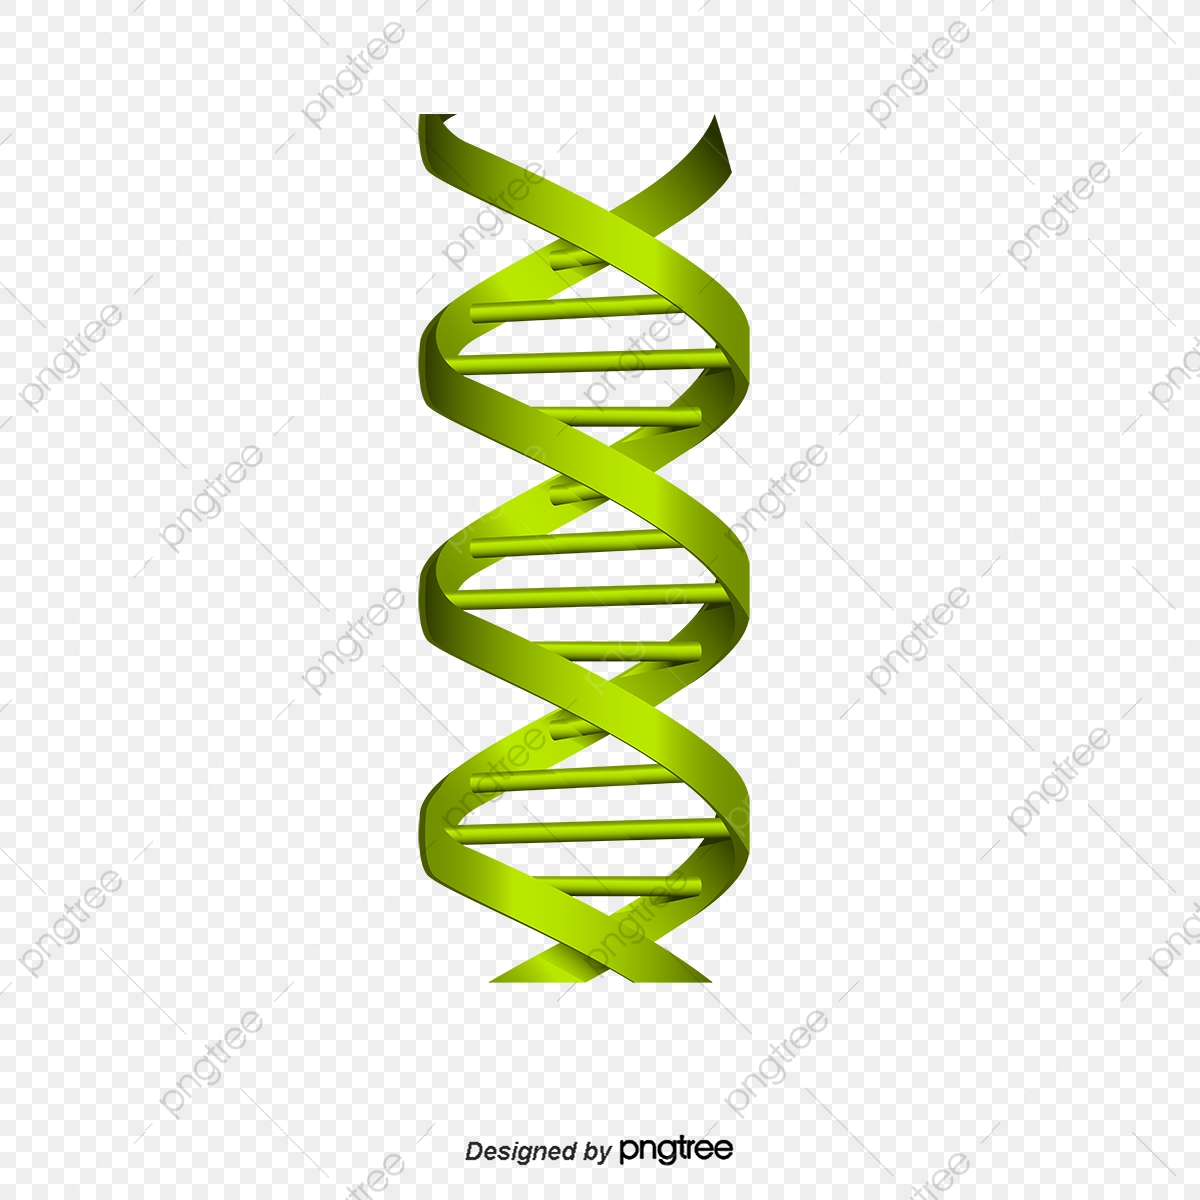 Dna Strand, Dna, Green, Chain Gene PNG Transparent Clipart Image and.